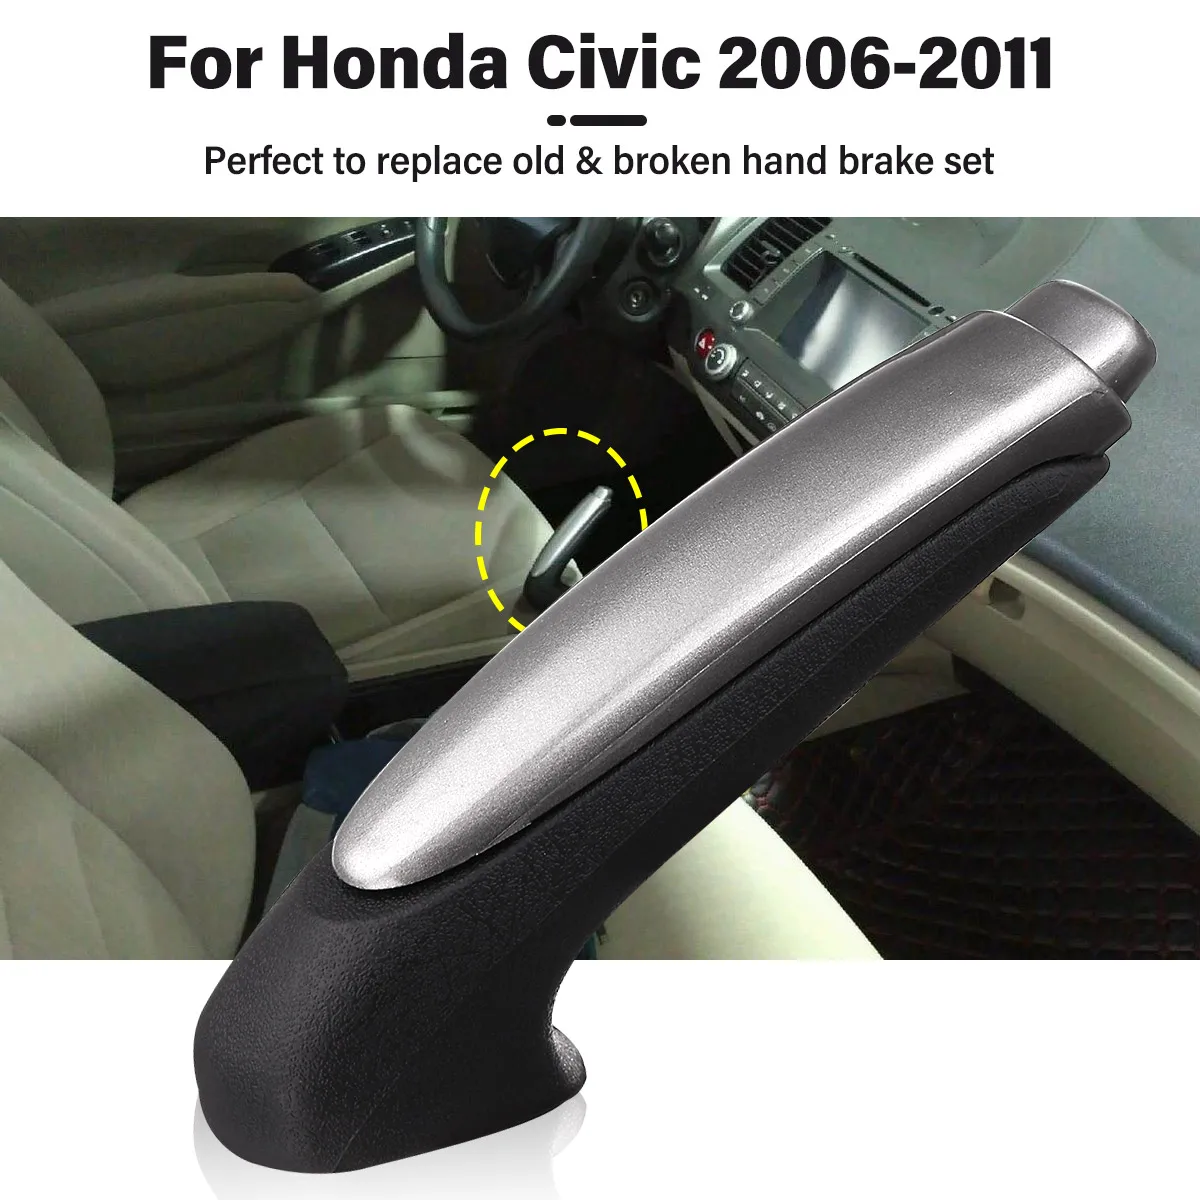 without XW-SSGPJ Black Emergency Car Interior Parking Hand Brake Handle Lever Grip Cover For Honda For Civic 2006-2011 